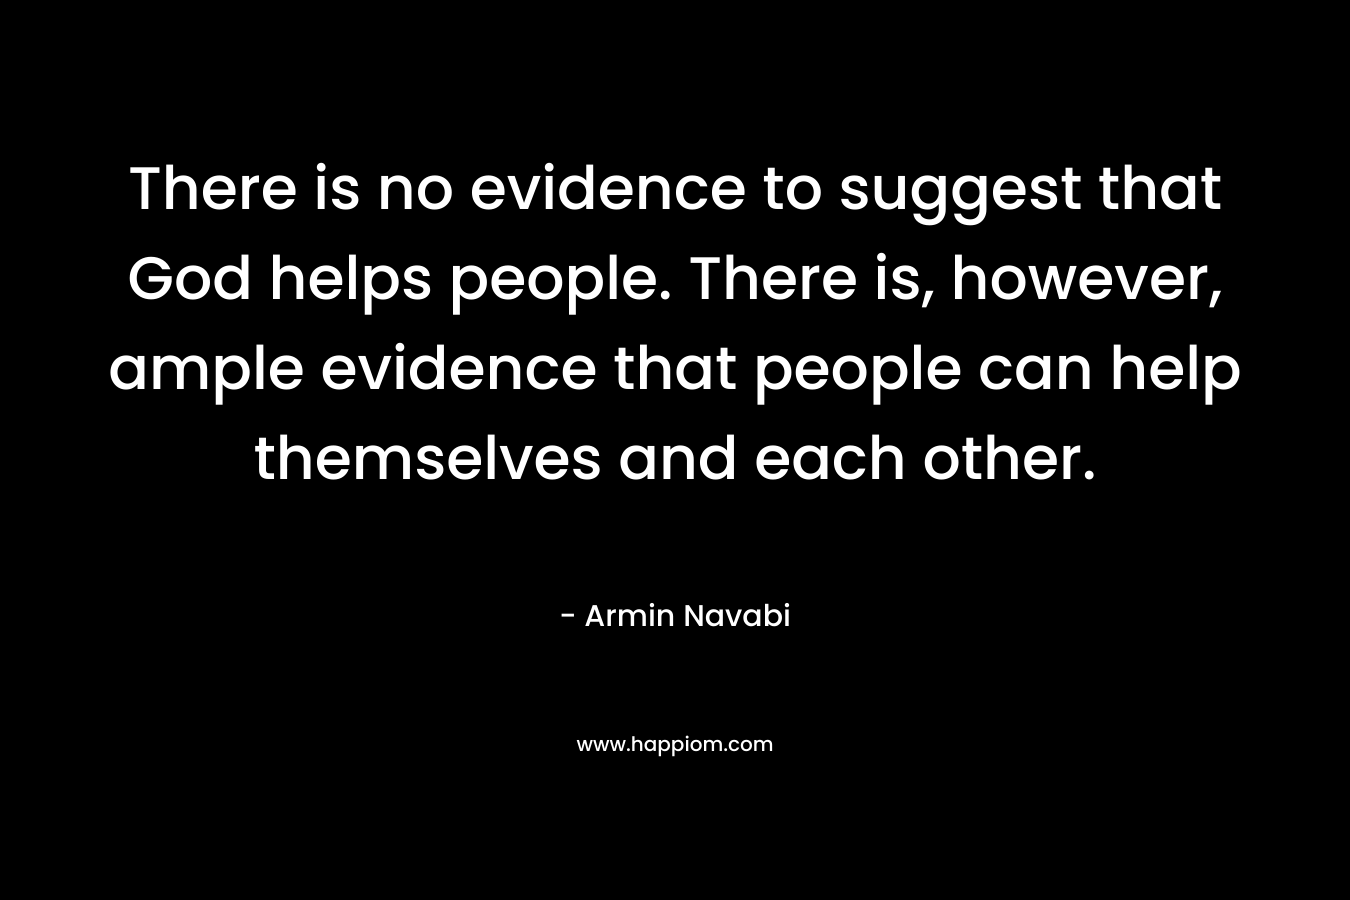 There is no evidence to suggest that God helps people. There is, however, ample evidence that people can help themselves and each other. – Armin Navabi